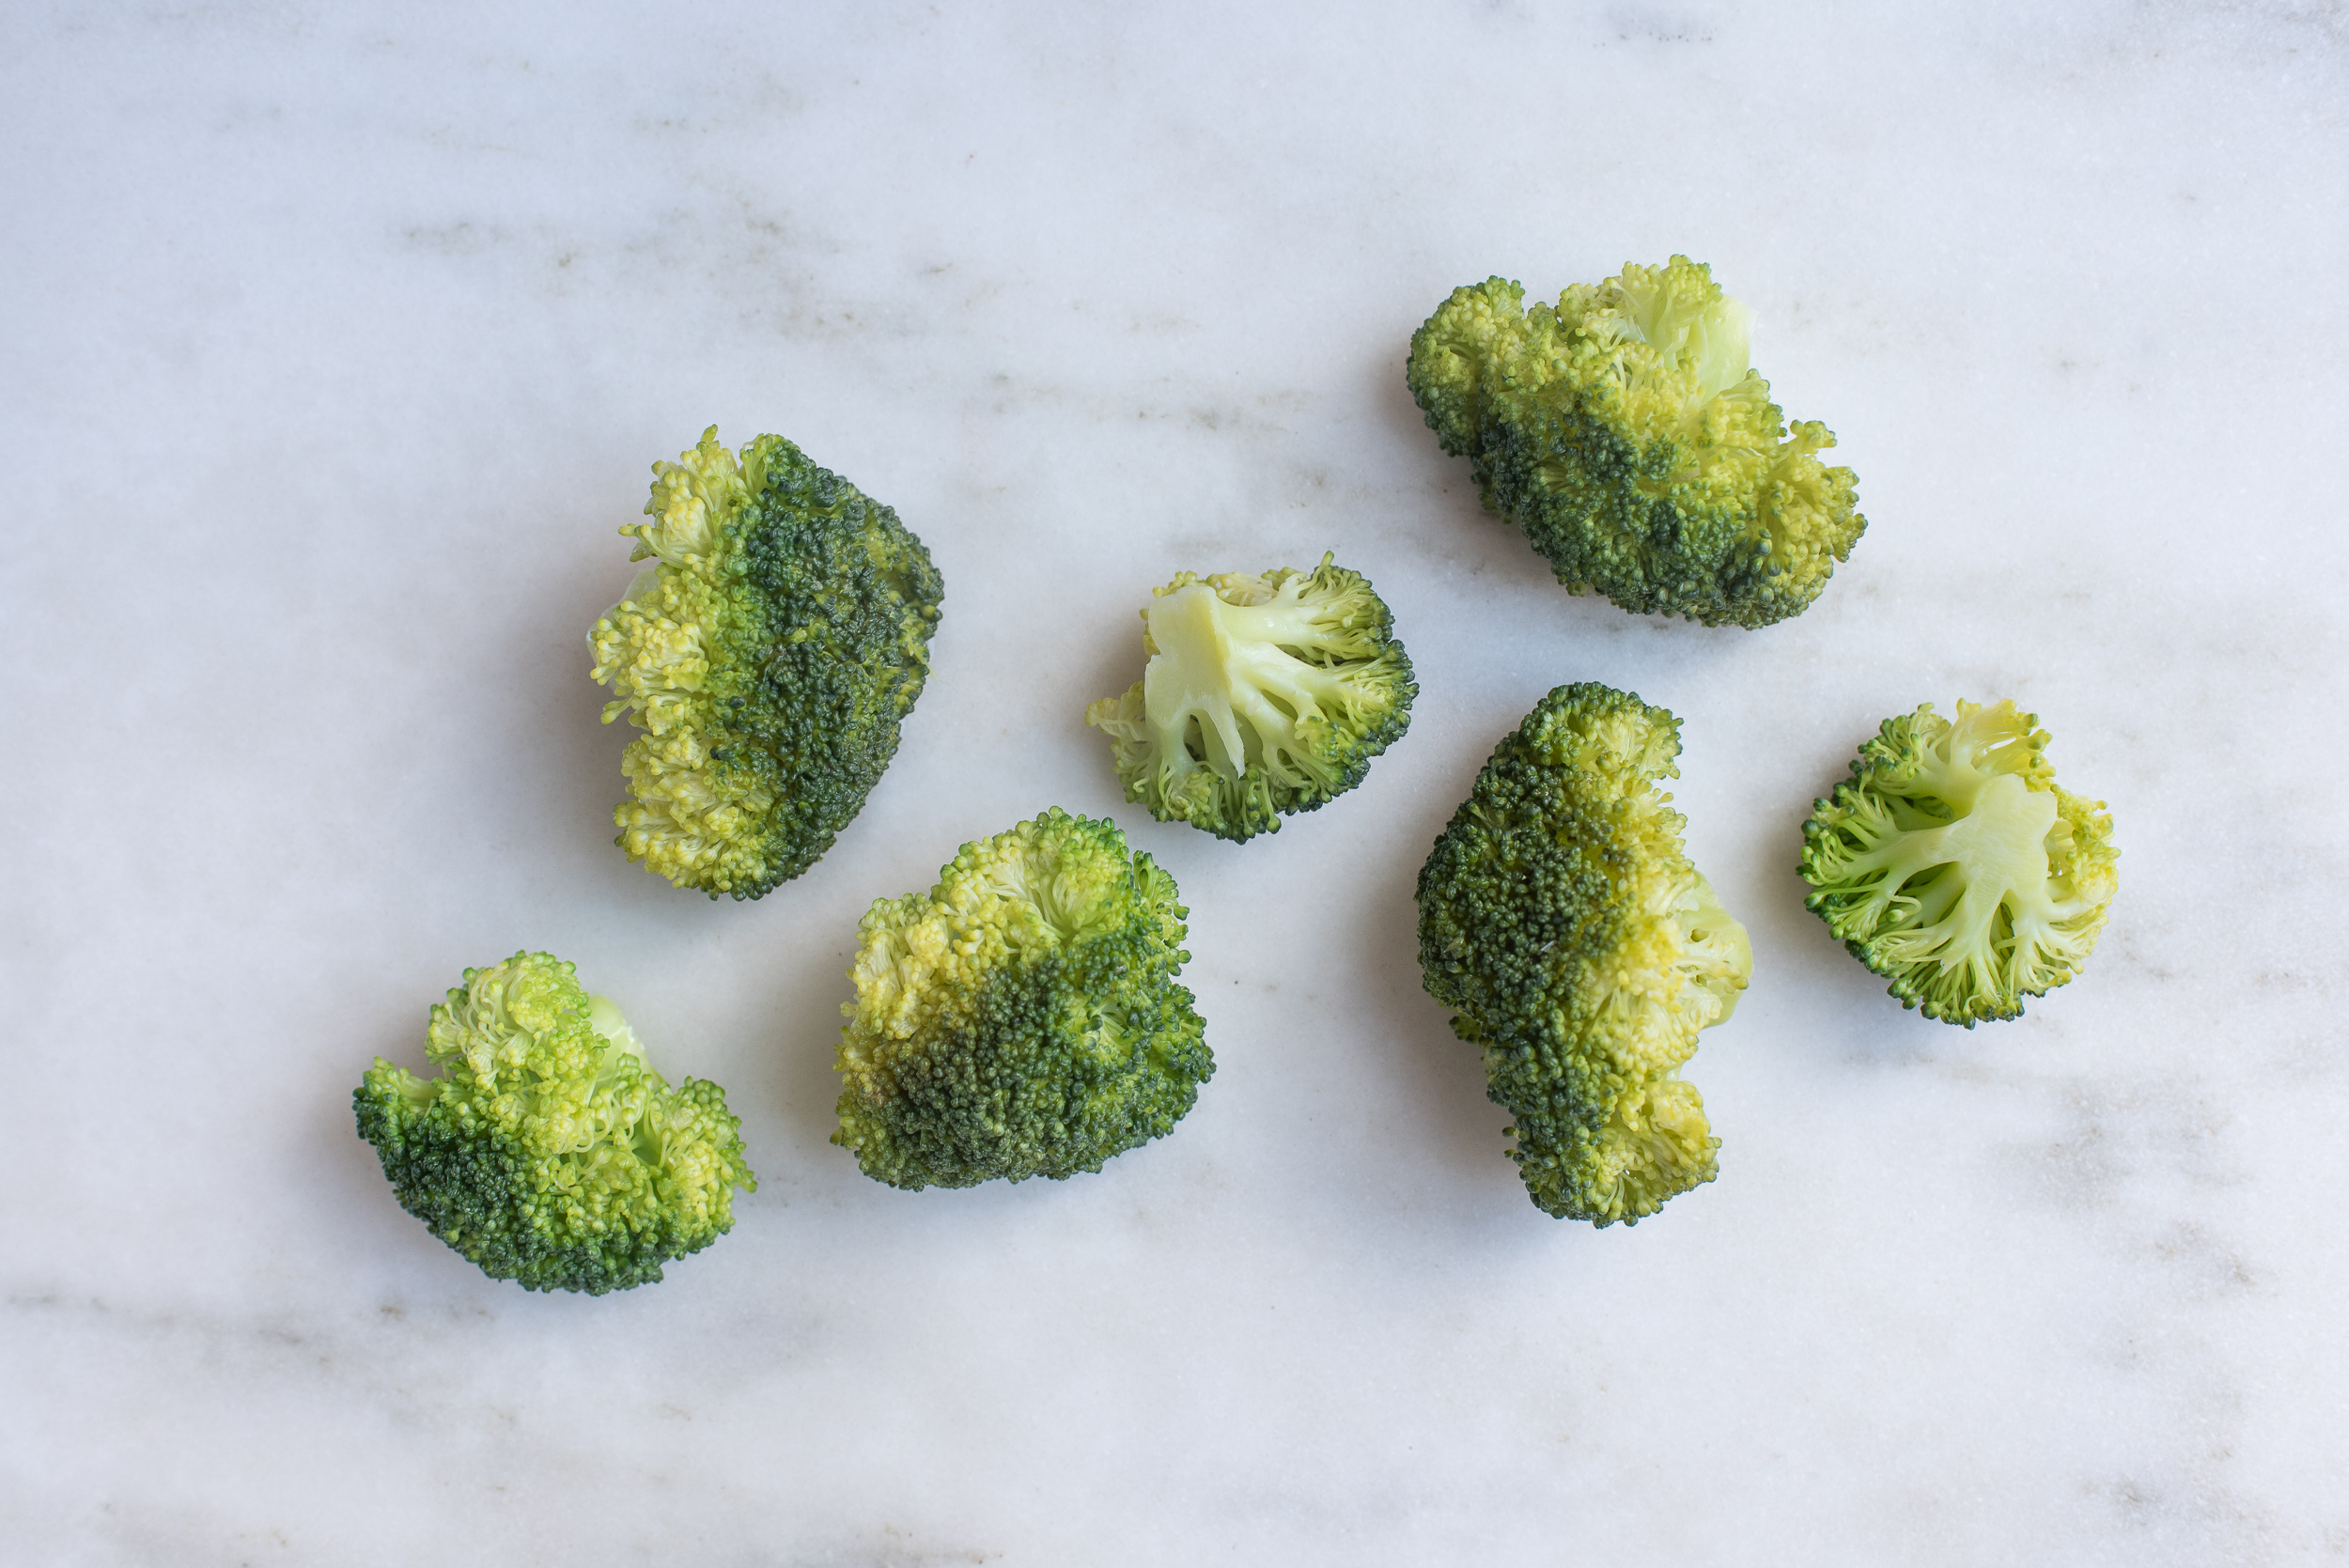 seven large cooked broccoli florets on a marble background